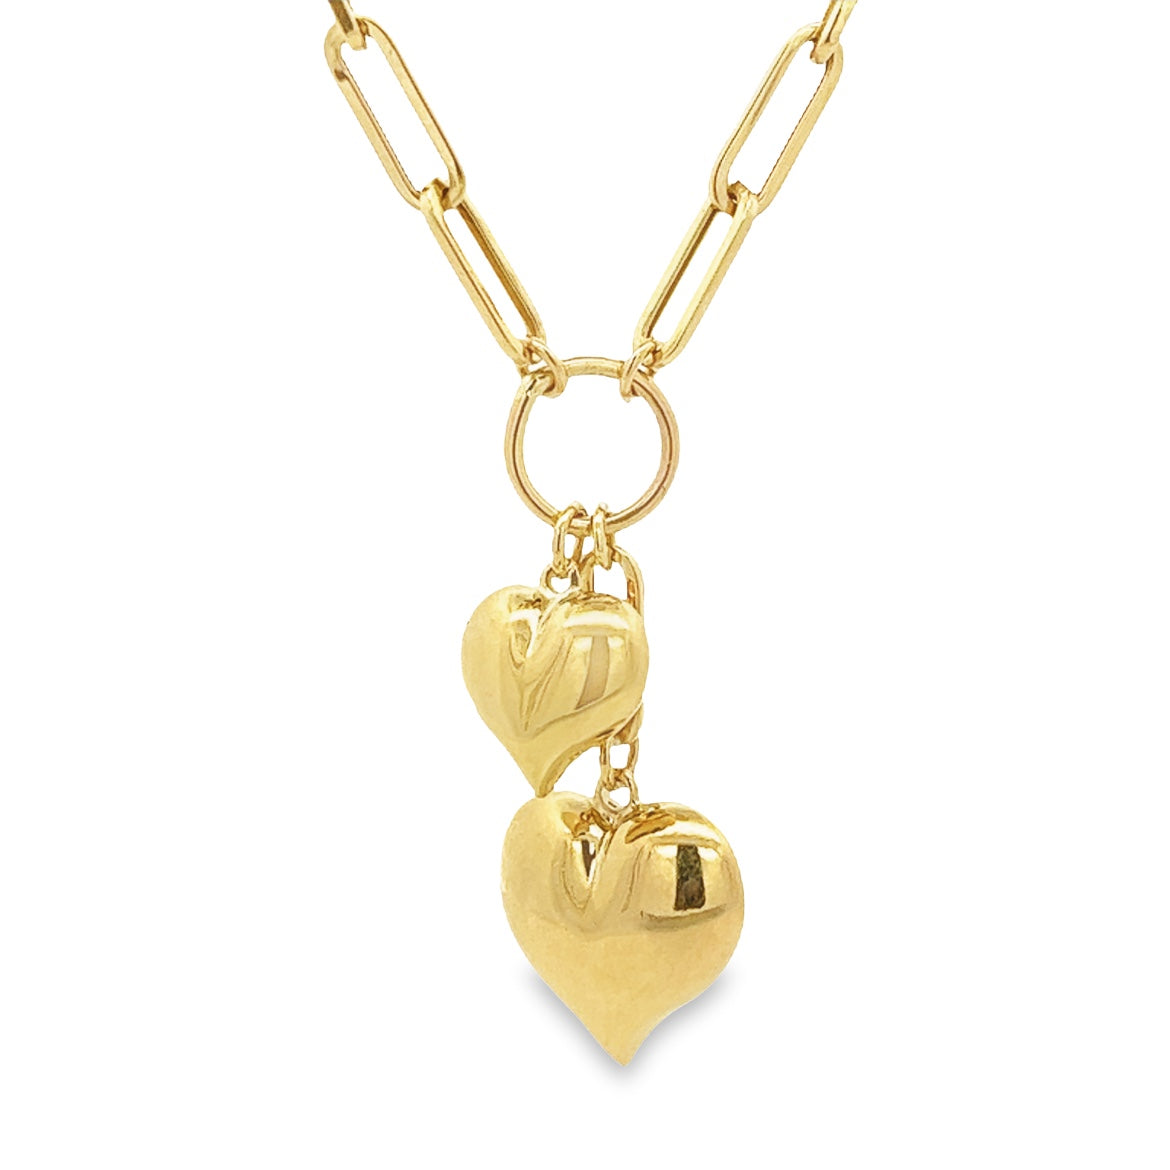 14K GOLD PAPER CLIP CHAIN WITH HEART CHARMS